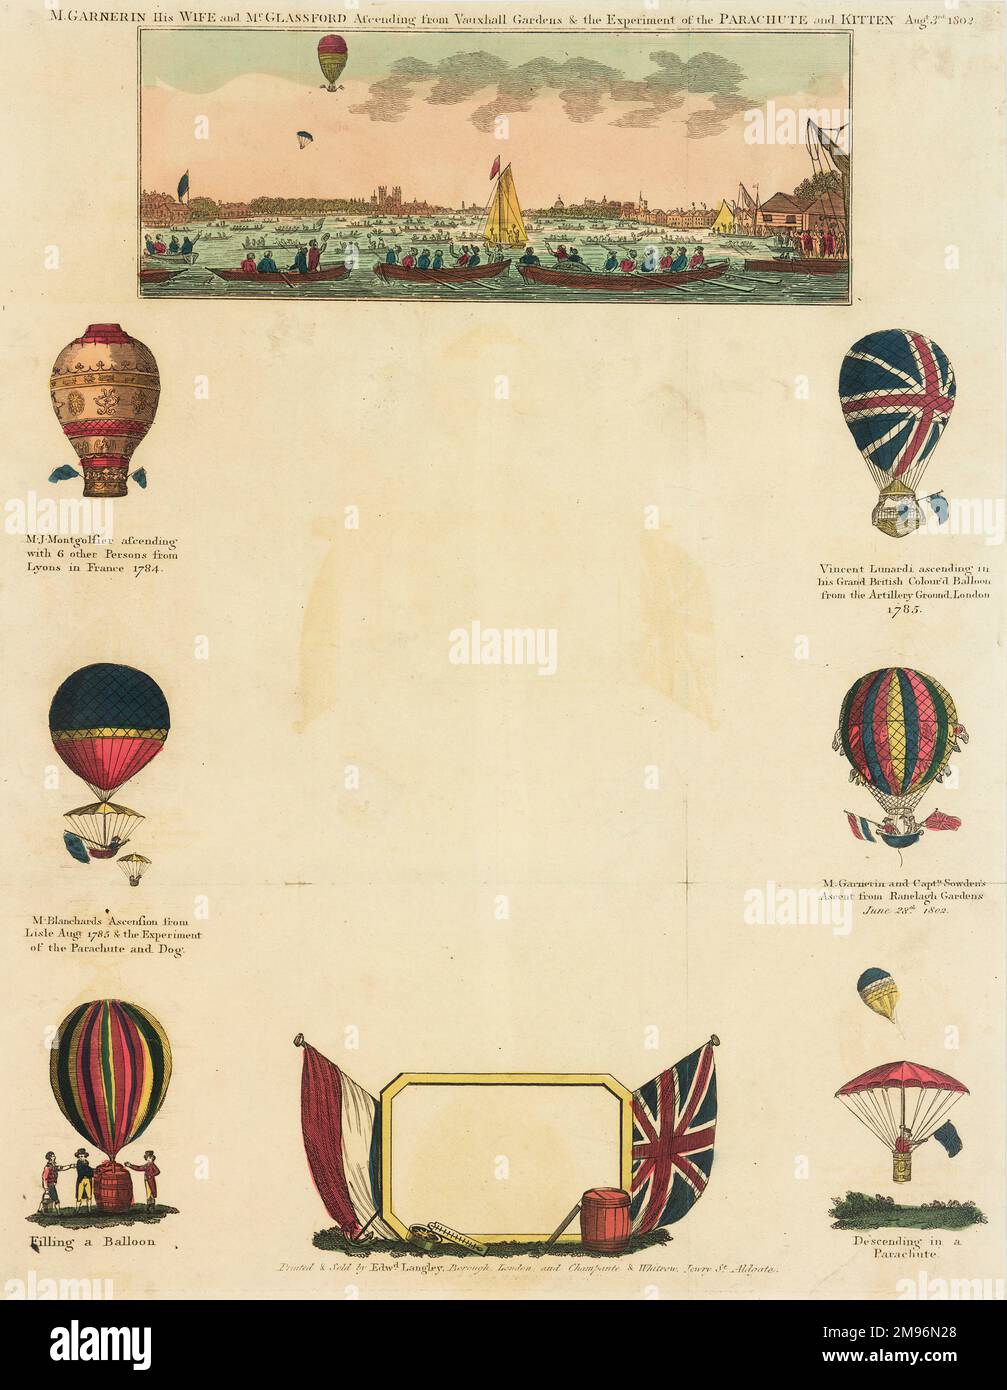 Various balloons and ballooning scenes around the outside of a poster.  At the top is Garnerin, his wife and Mr Glassford ascending from Vauxhall Gardens in 1802, with a kitten descending by parachute over the River Thames.  Balloons below were piloted by Montgolfier and Blanchard (left) and Lunardi, Garnerin and Captain Sowden (right).  In the lower left is a balloon being filled, and in the lower right a parachute descent.  At the bottom centre is an arrangement with French and British flags. Stock Photo